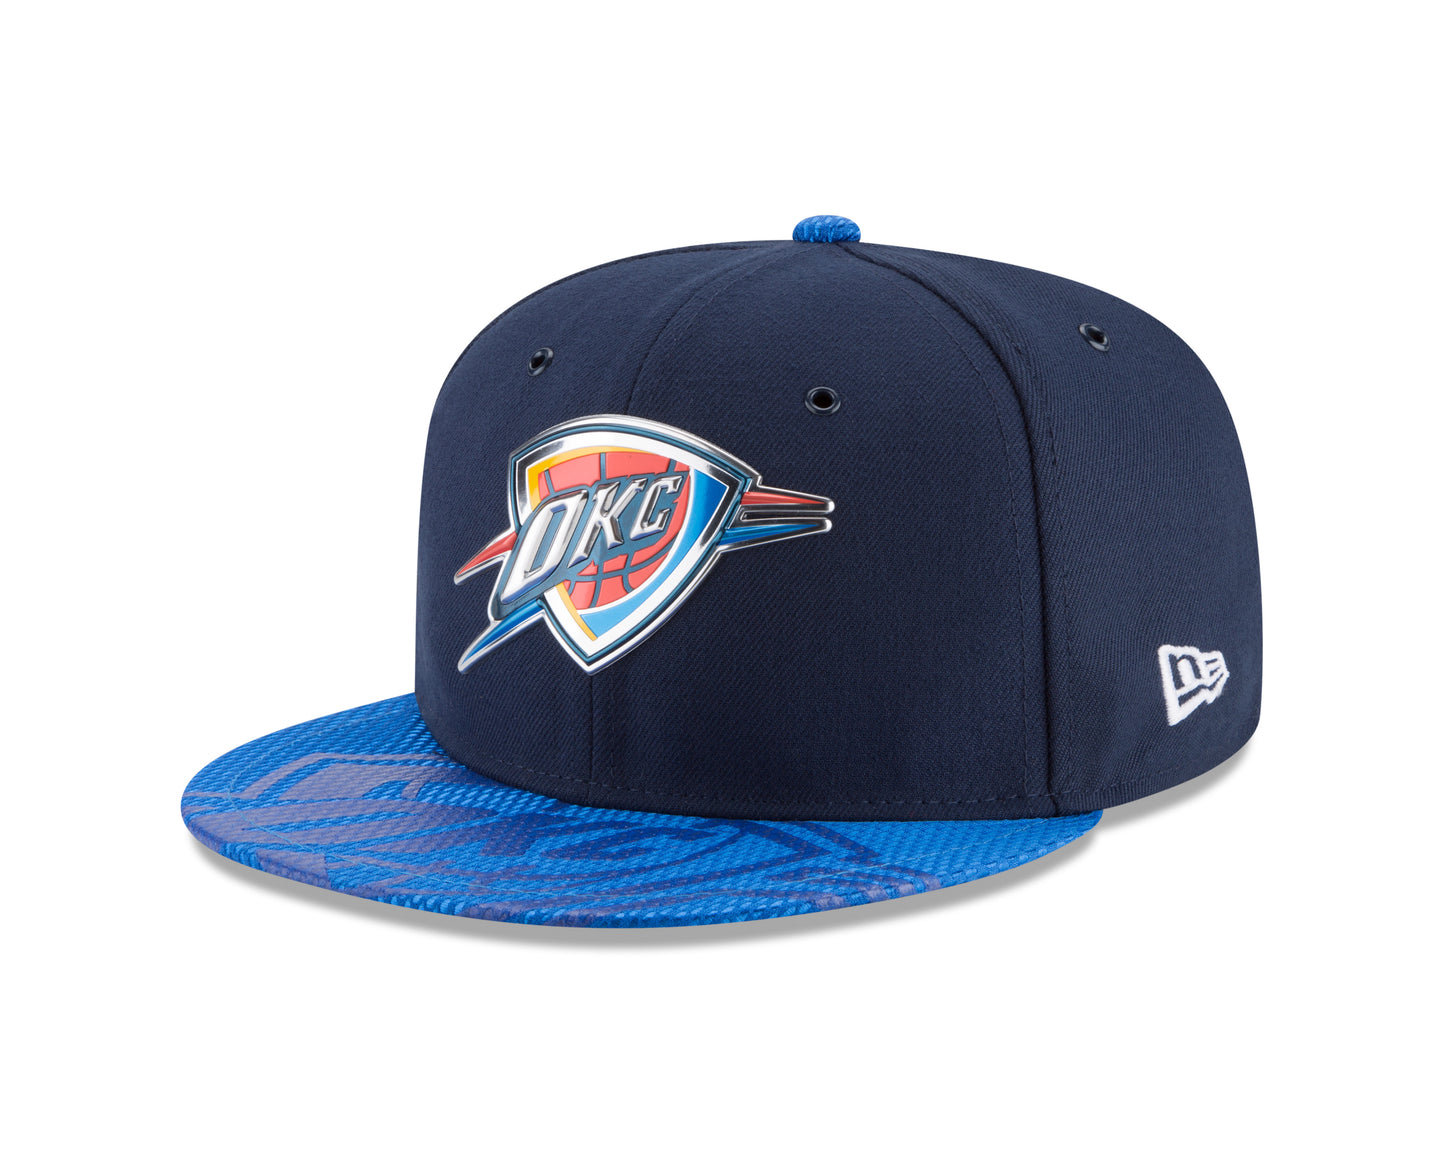 Men’s Oklahoma City Thunder NBA18 All Star Game On Court Collection 9FIFTY Snapback Hat By New Era